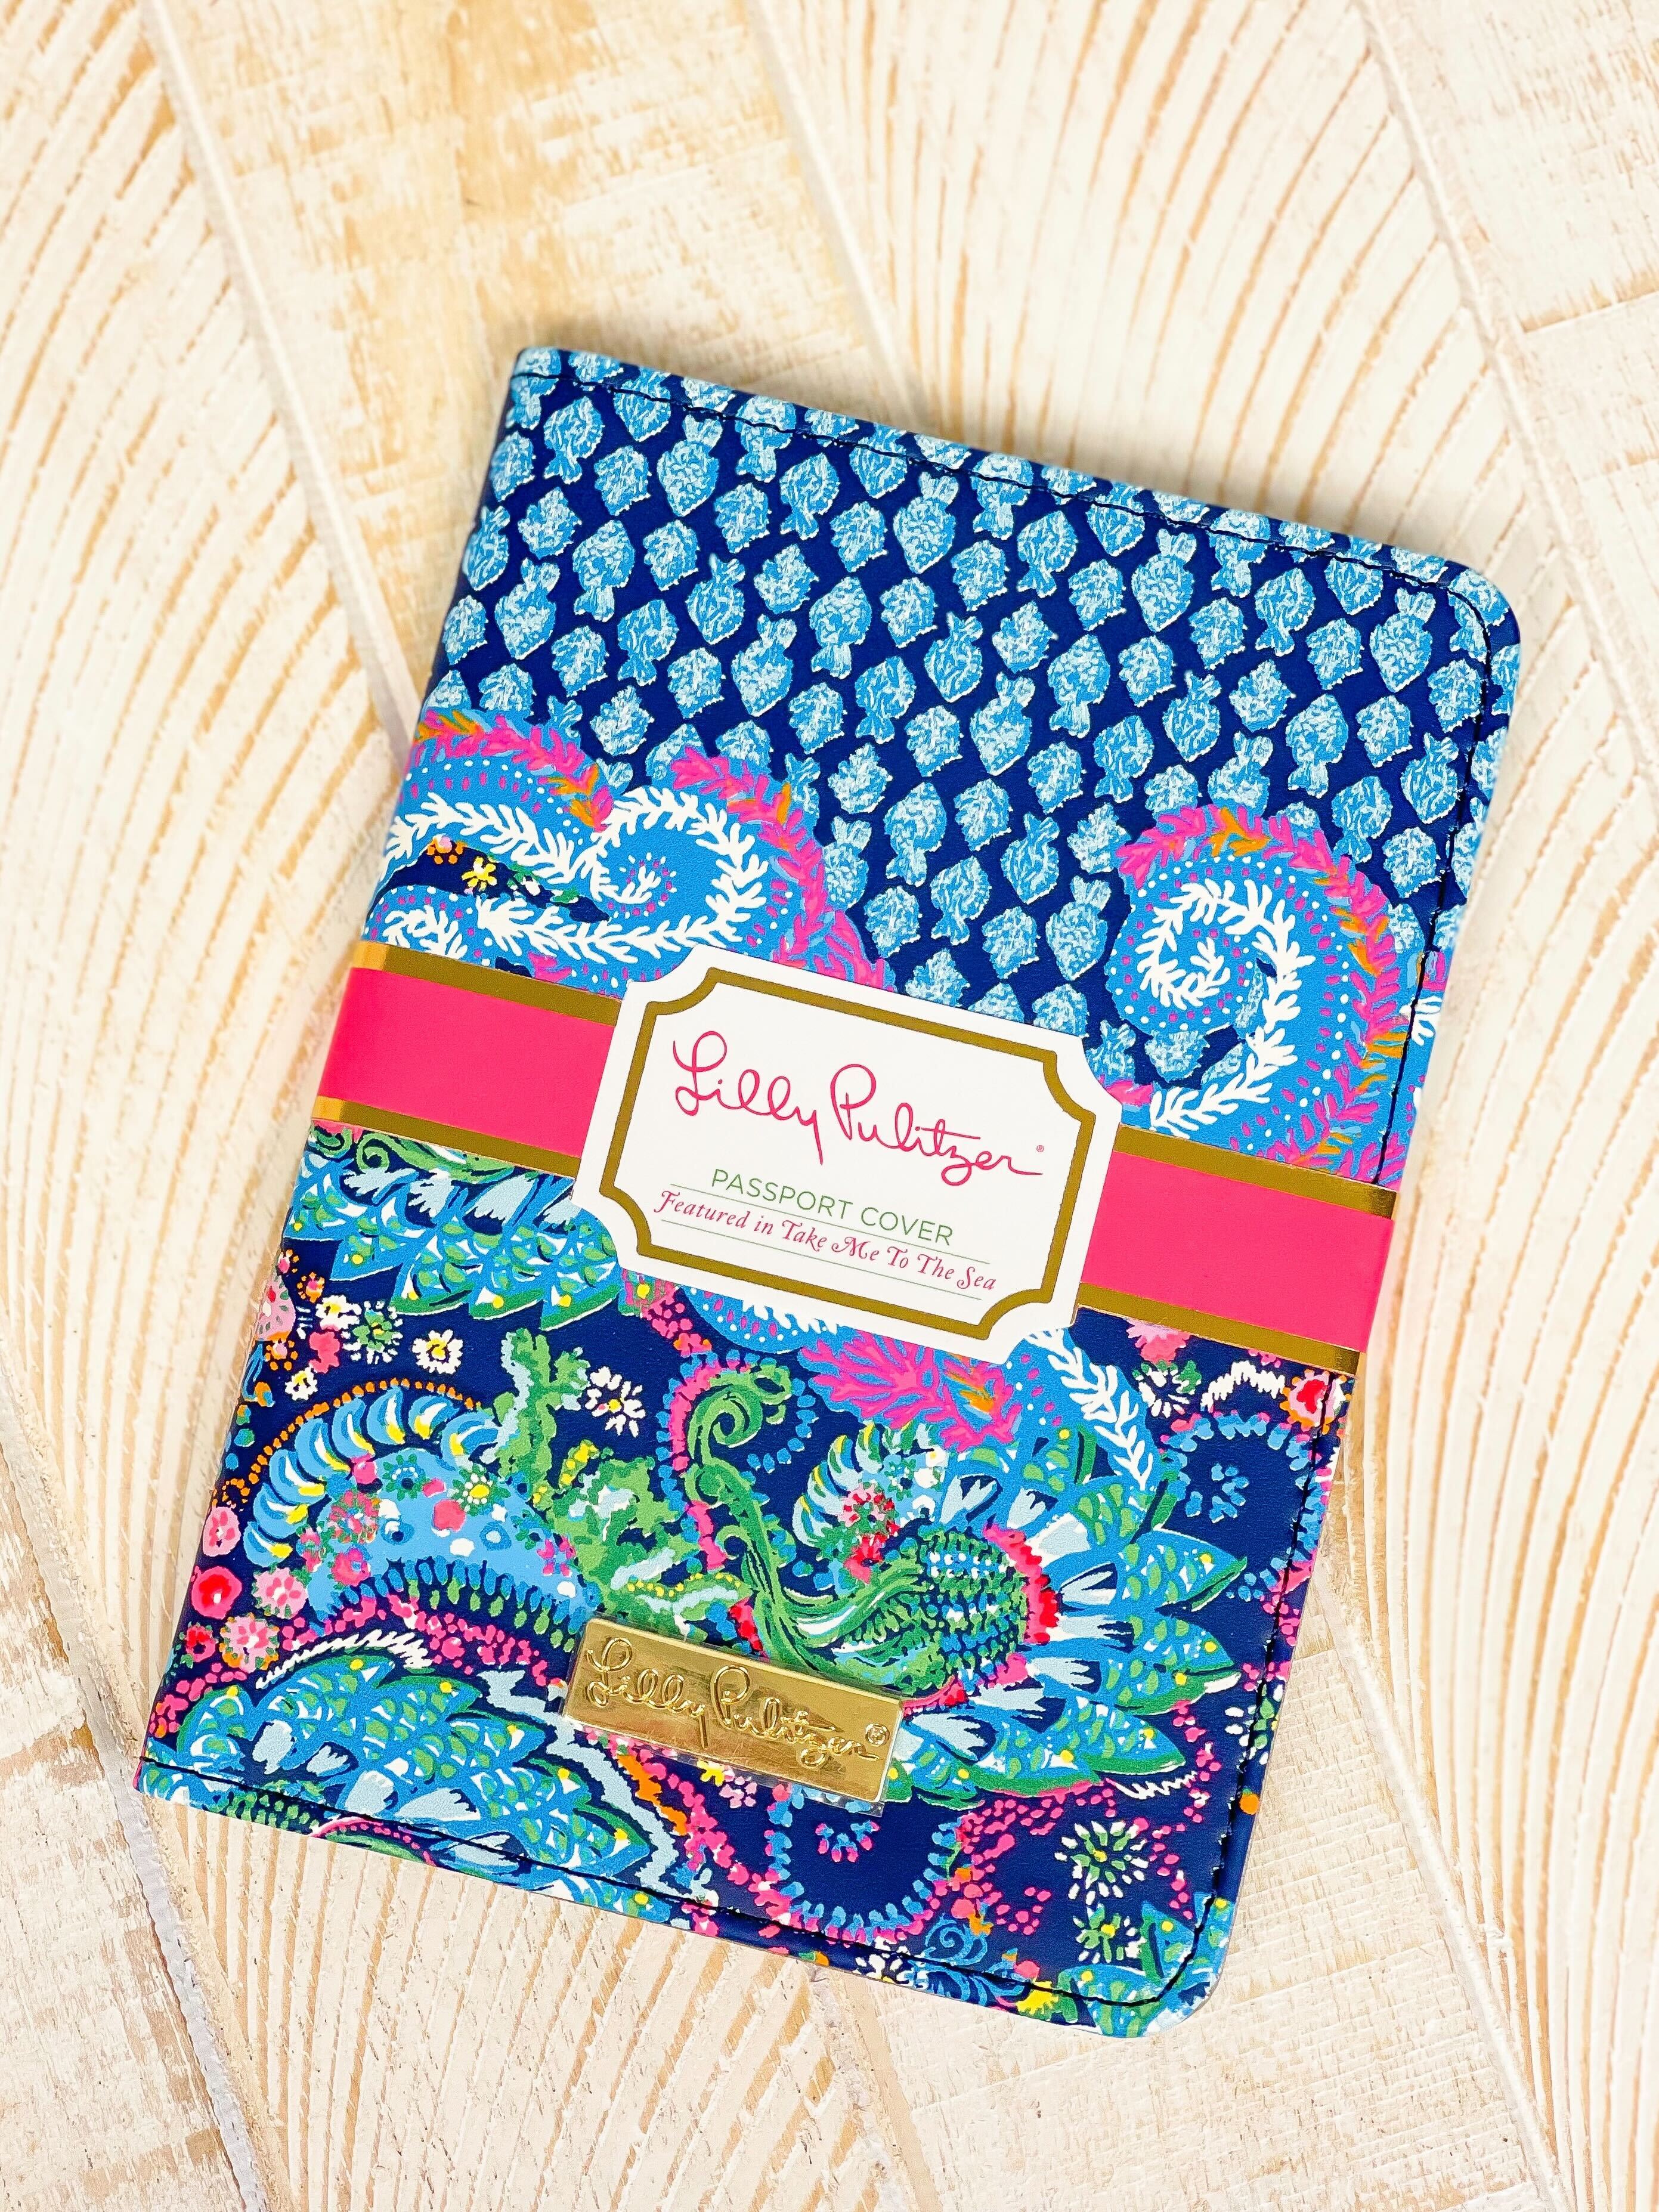 Passport Cover by Lilly Pulitzer - Take Me to the Sea